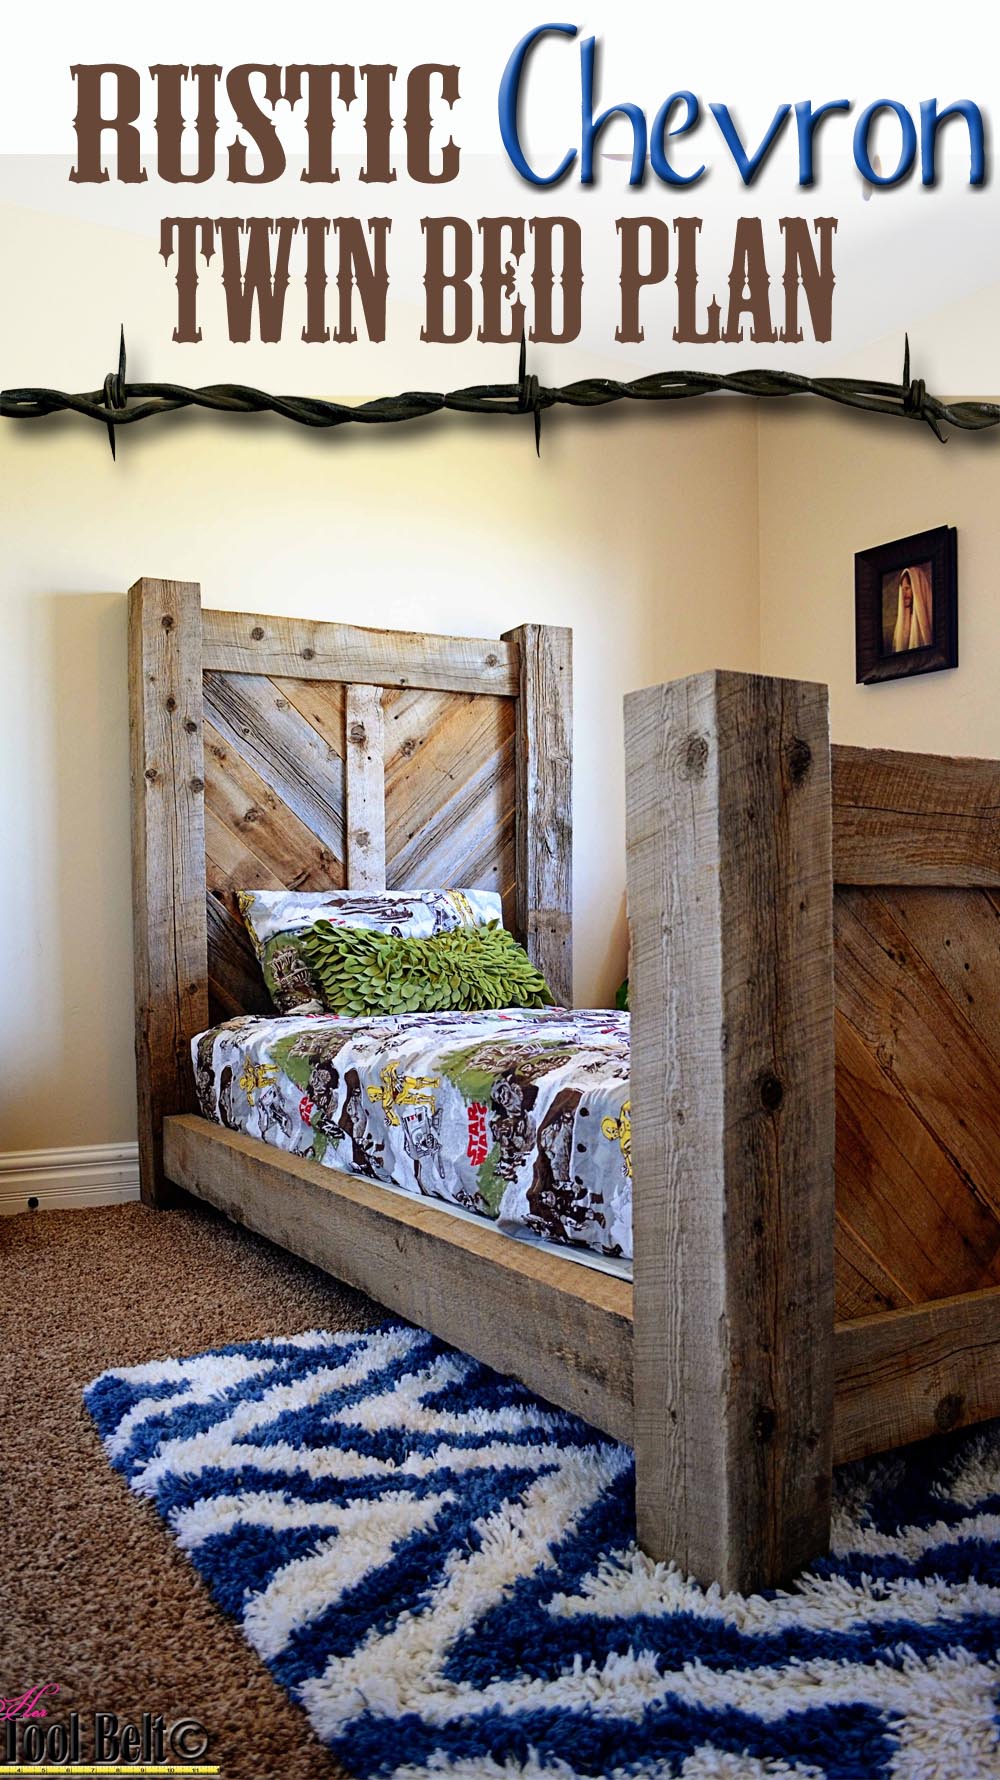 Rustic Barnwood Twin Bed Plan Her, How To Make A Rustic Bed Frame